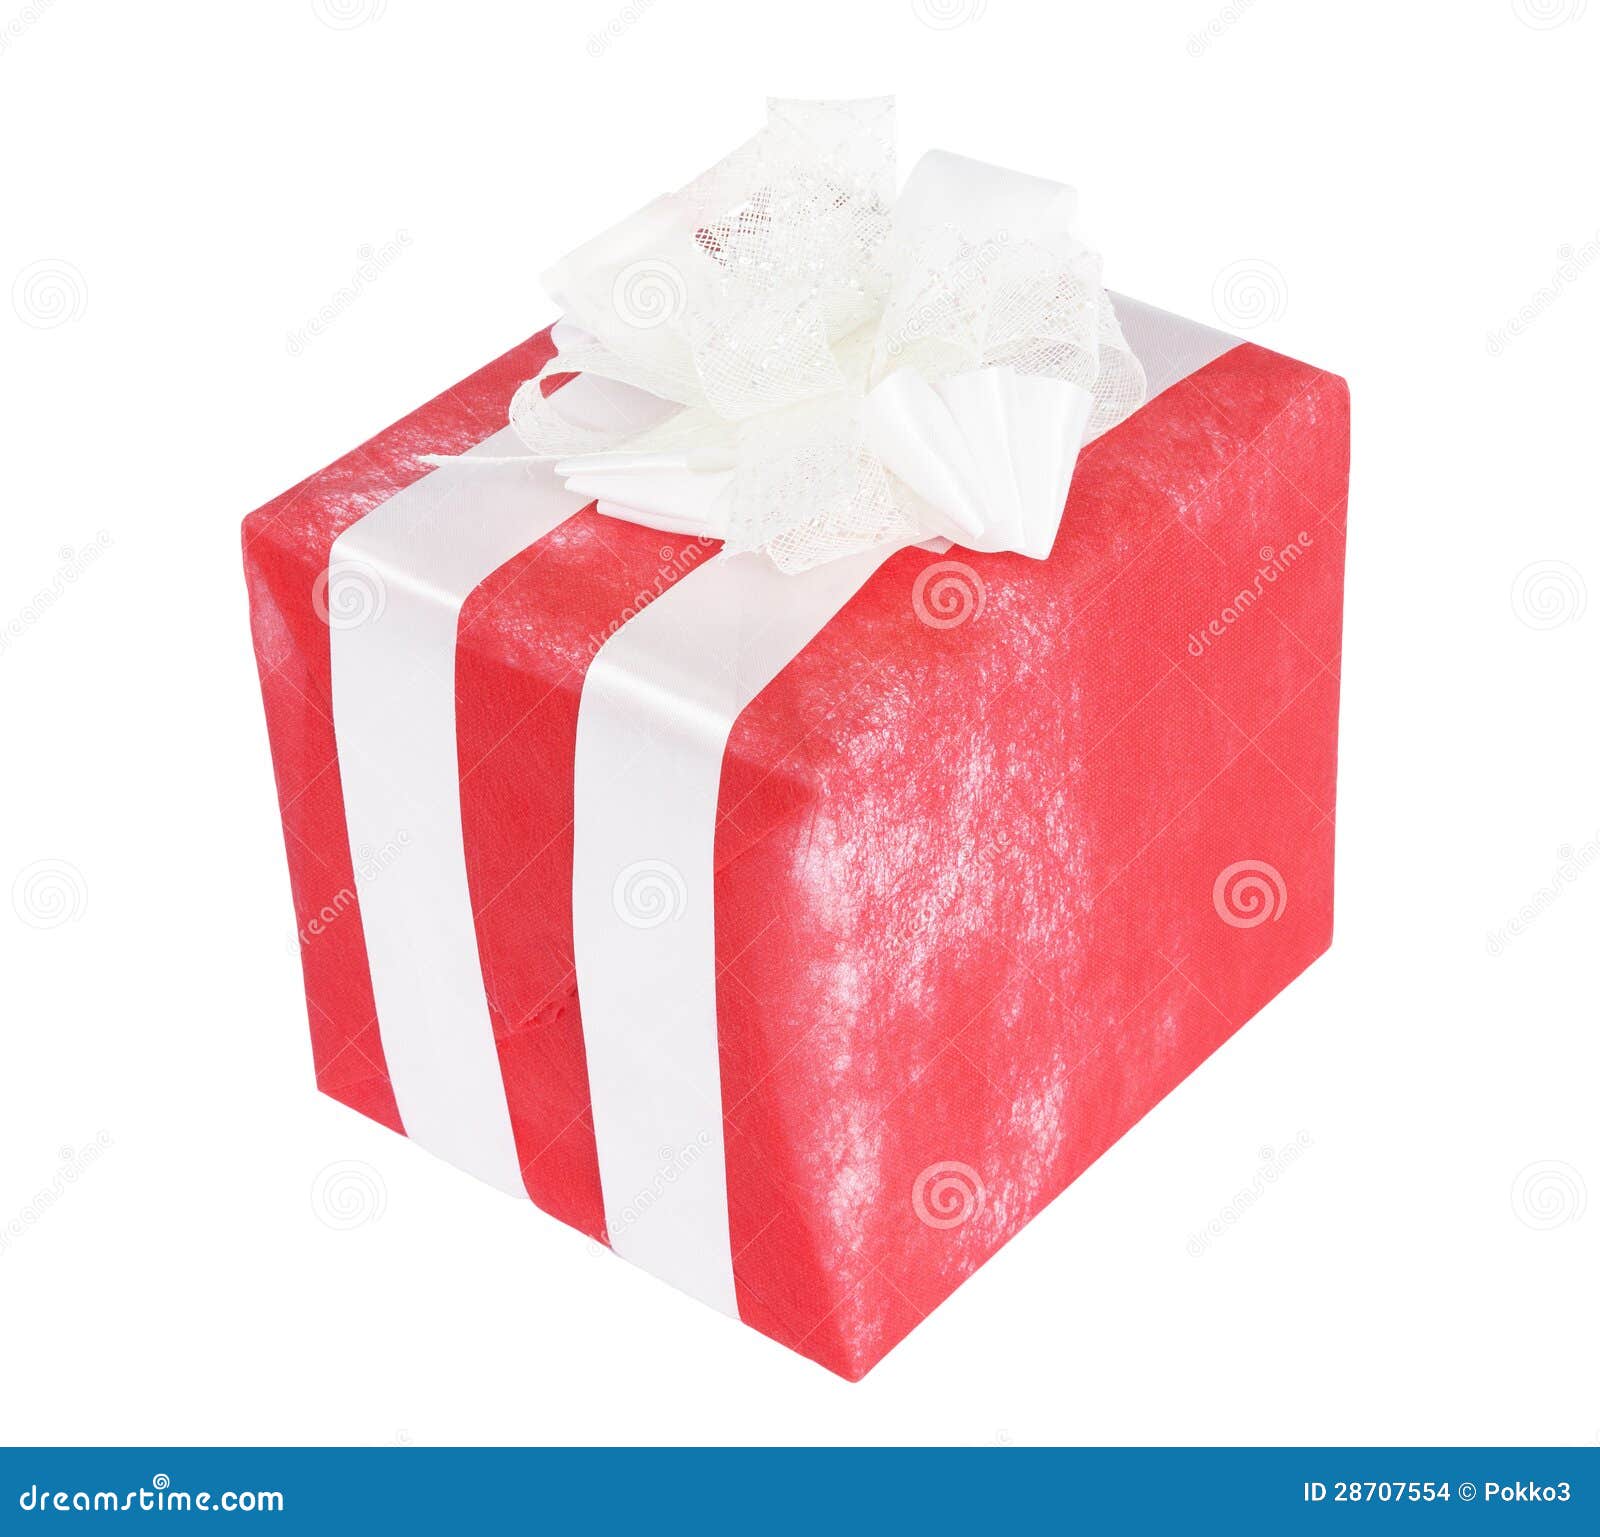 Red gift box stock photo. Image of color, birthday